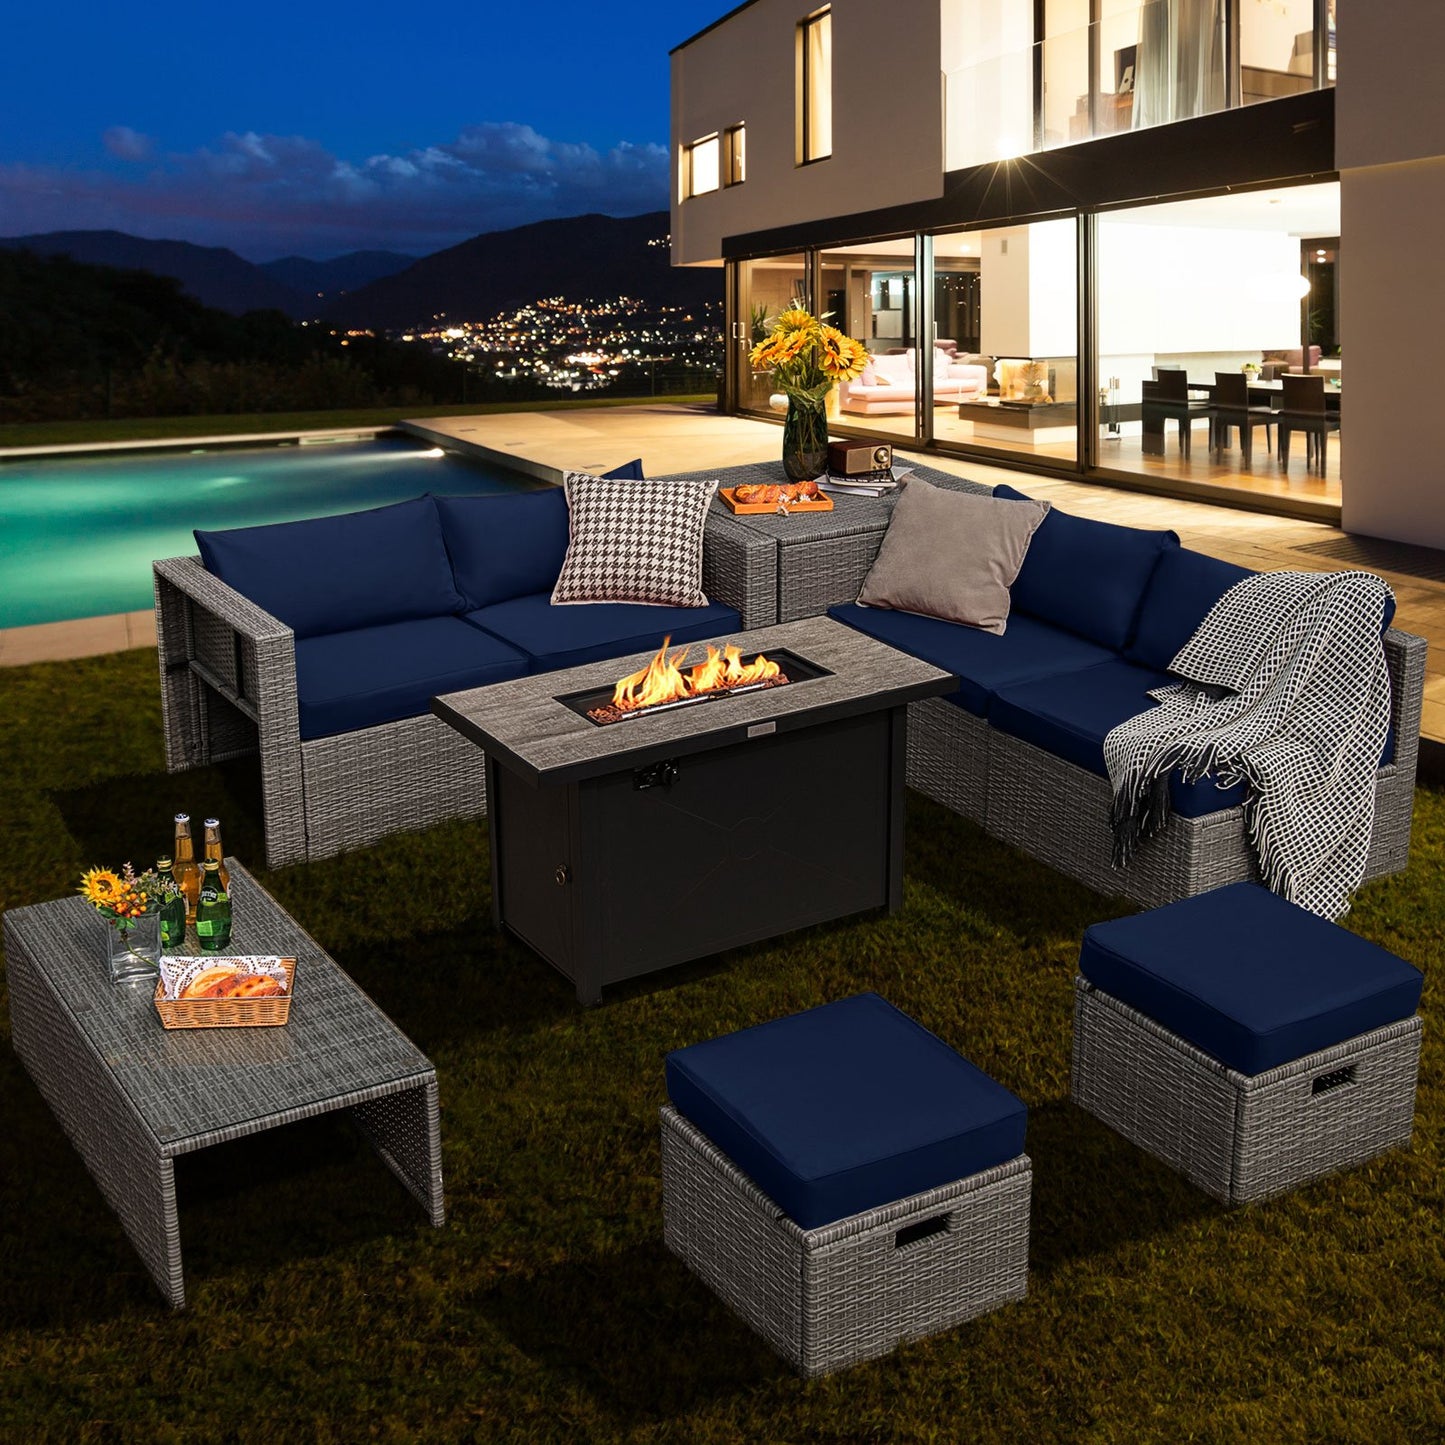 9 Pieces Patio Furniture Set with 42 Inches 60000 BTU Fire Pit, Navy